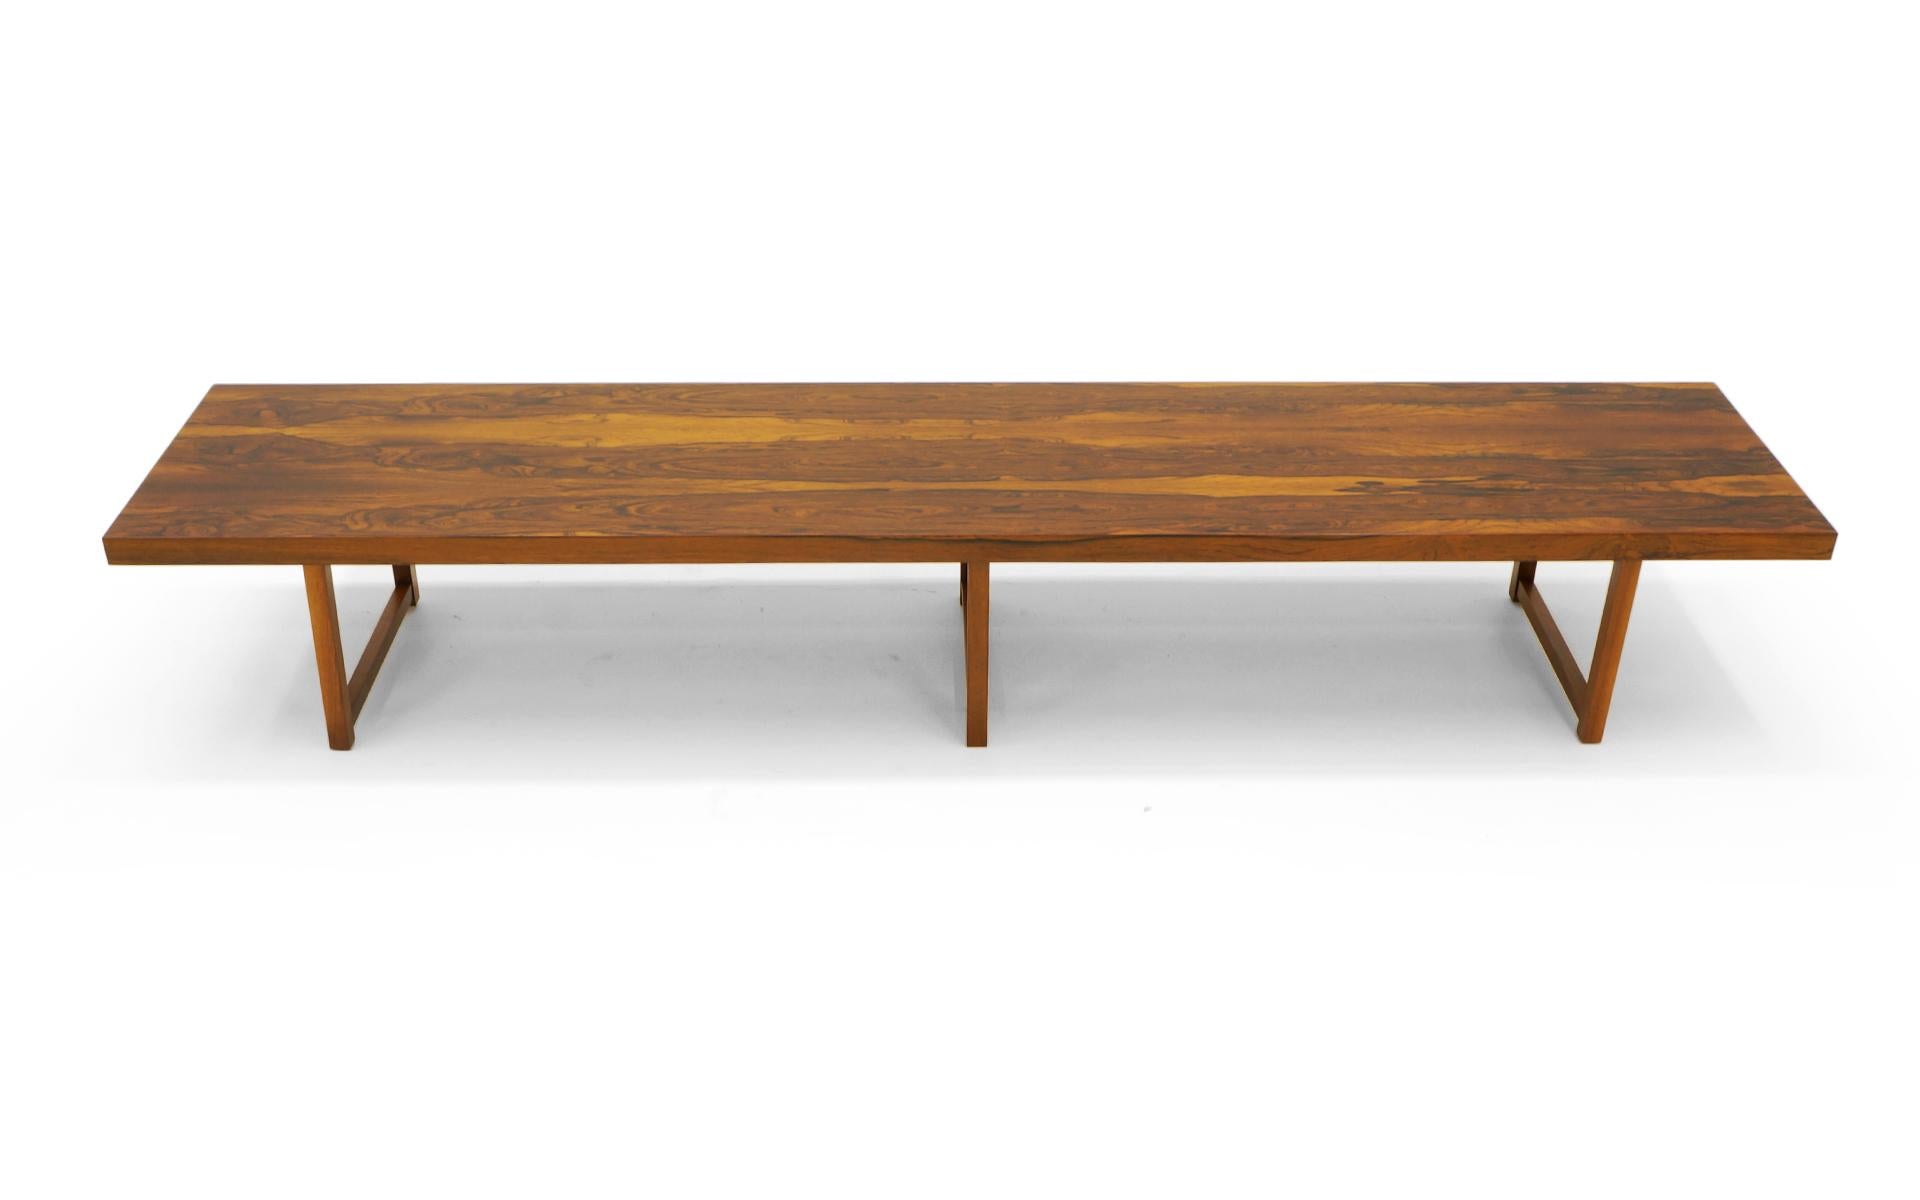 Stunning Brazilian Rosewood, 8 feet long (96 inches), bench (or coffee table) by Milo Baughman for Thayer Coggin. The figuring in the rosewood is exceptional. Free of any scratches, dents, or chips. Condition is excellent. Signed with the Milo